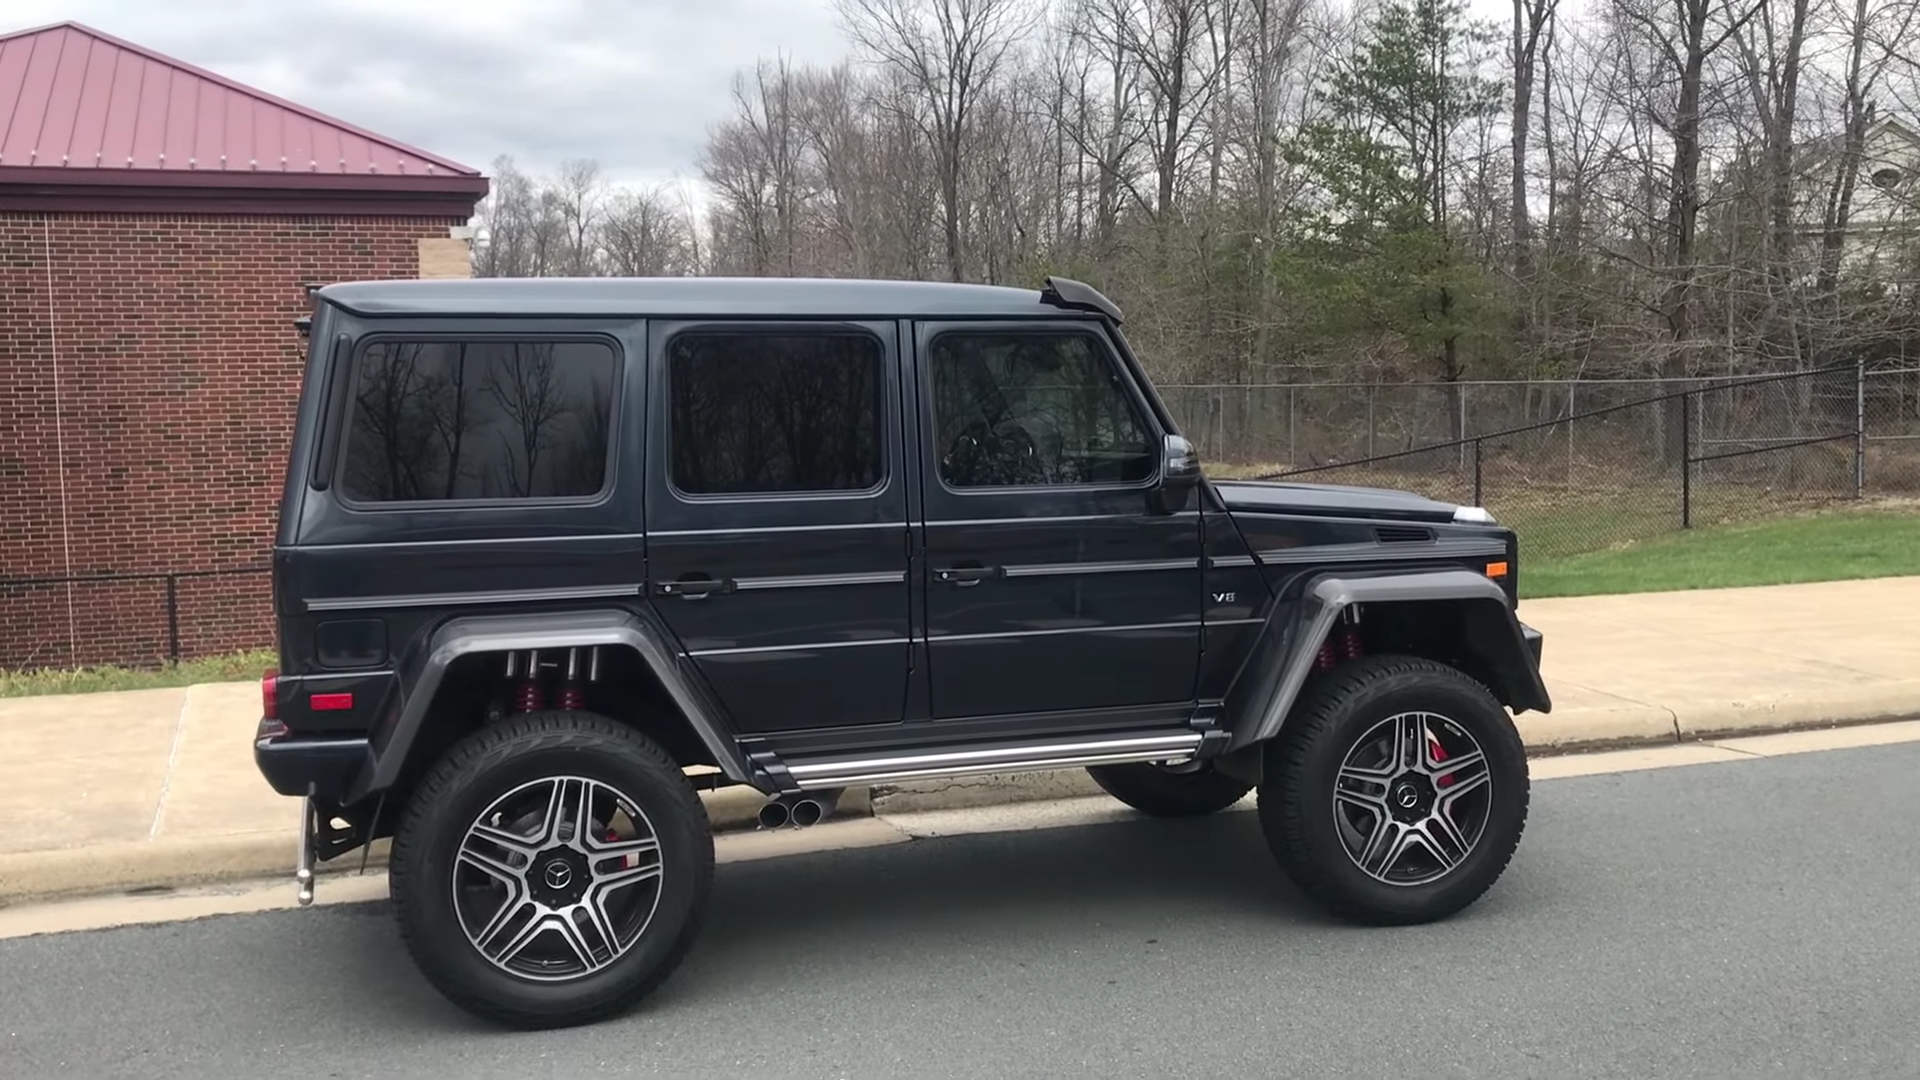 Mercedes-Benz G550 4×4²: A Master of Extremes